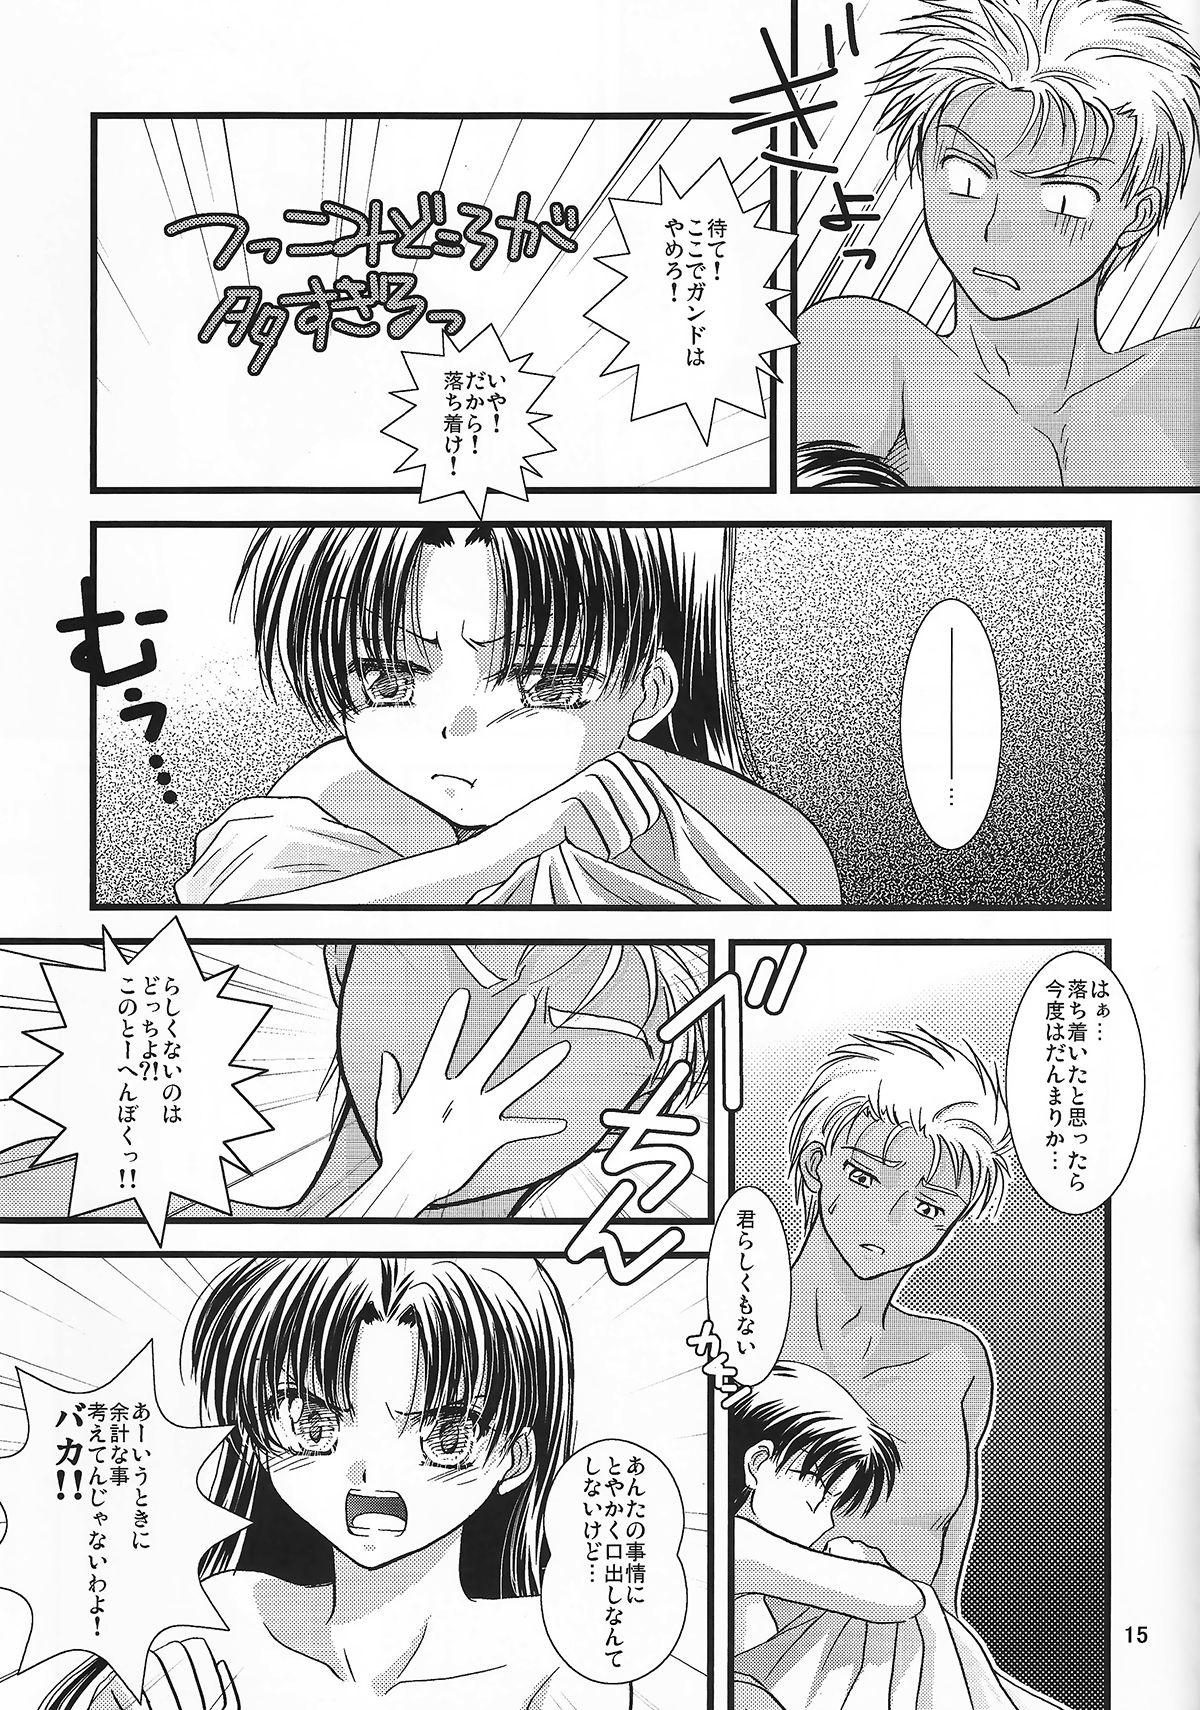 Menage AR A commemorative book of winter - Fate stay night Blondes - Page 13